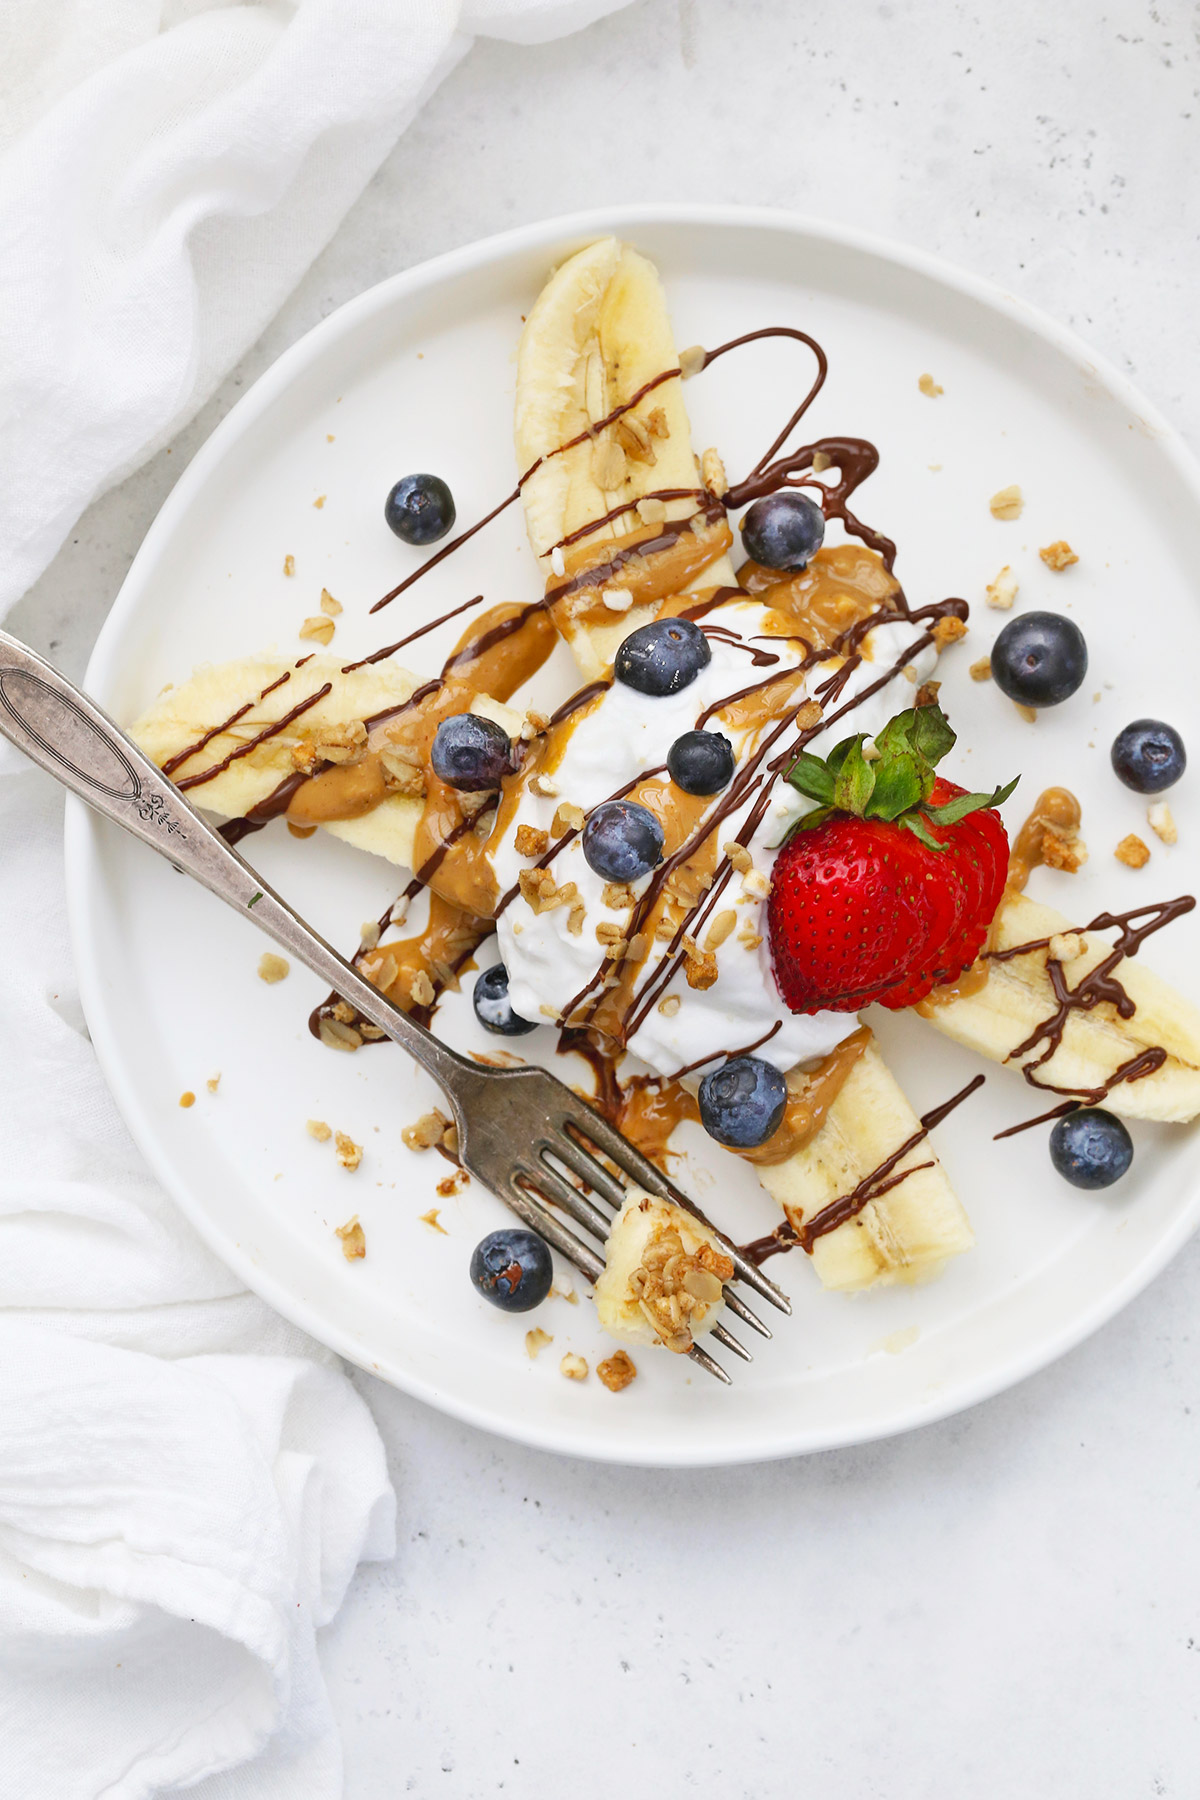 Close view of Healthy Banana Split with Yogurt, Peanut Butter, Chocolate, and berries on a white plate